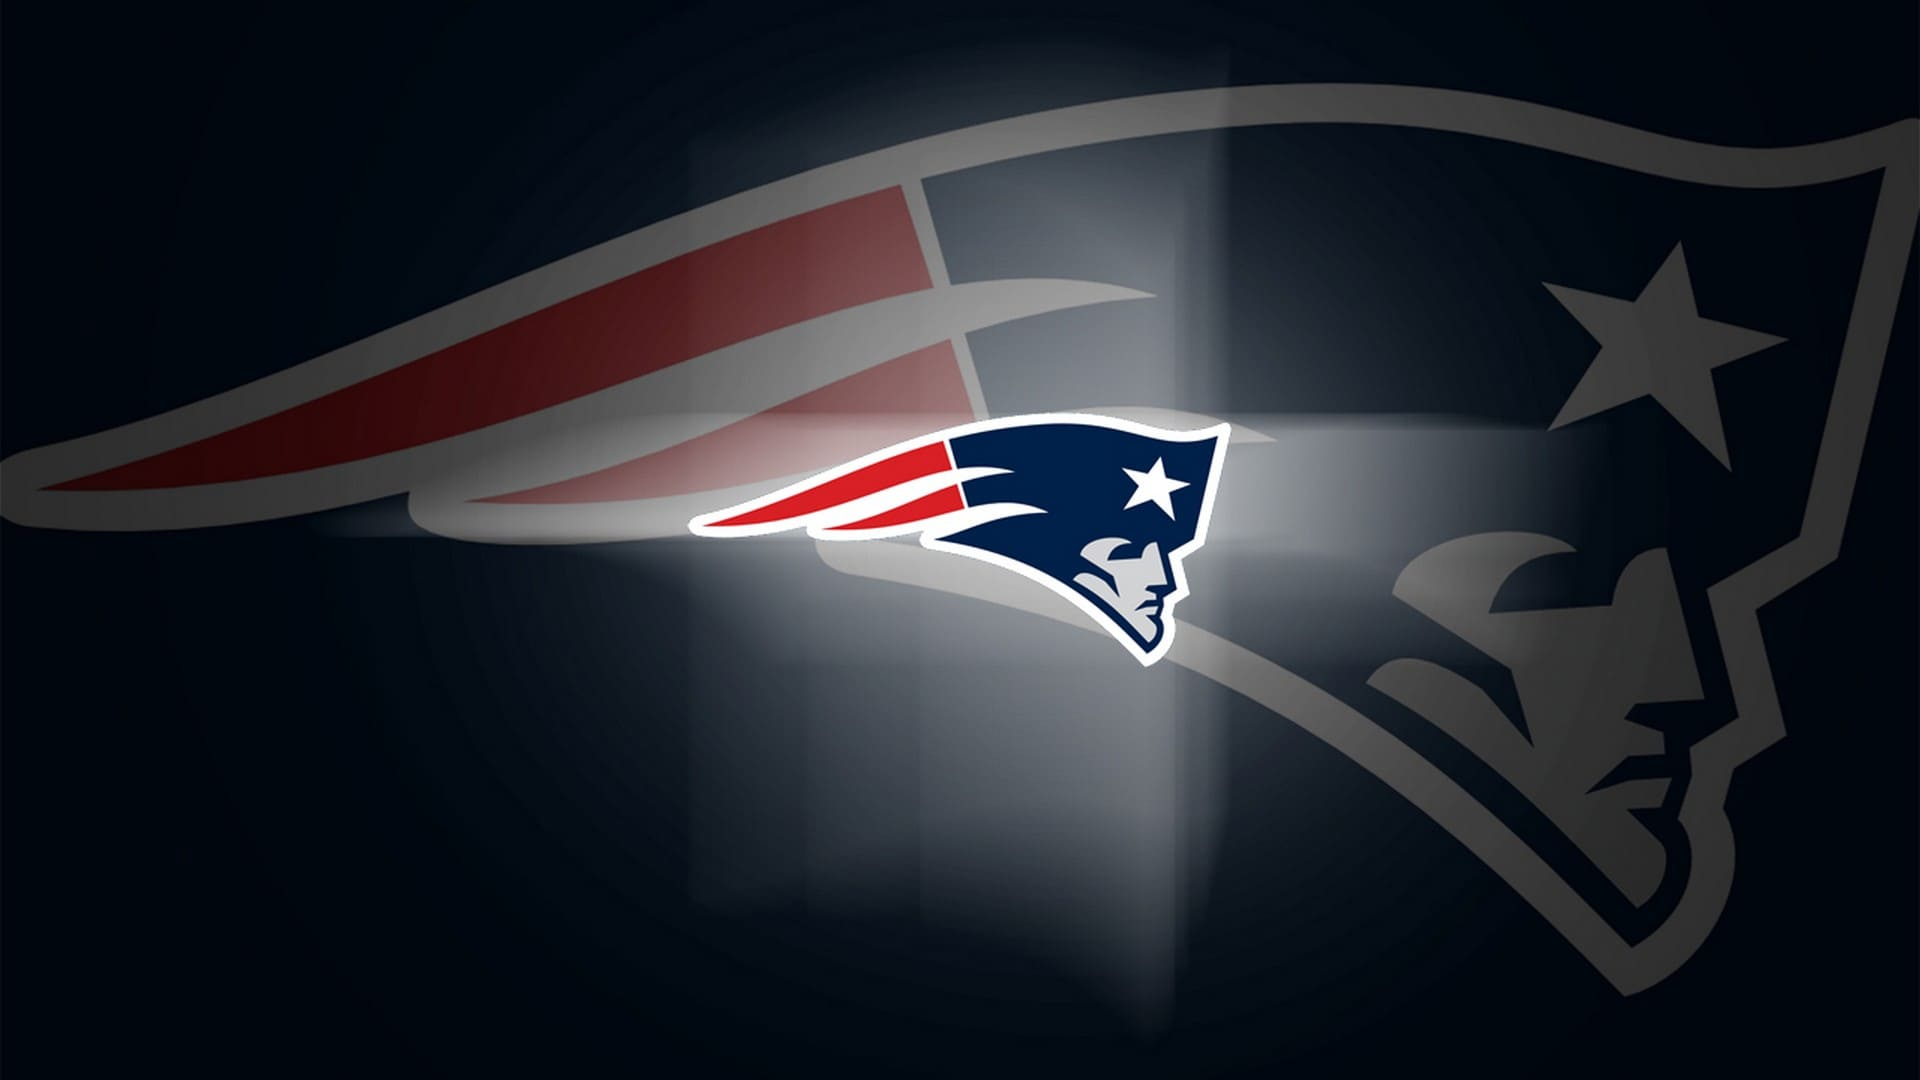 1920x1080 New England Patriots Wallpapers Top Best 35 New England Patriots Backgrounds